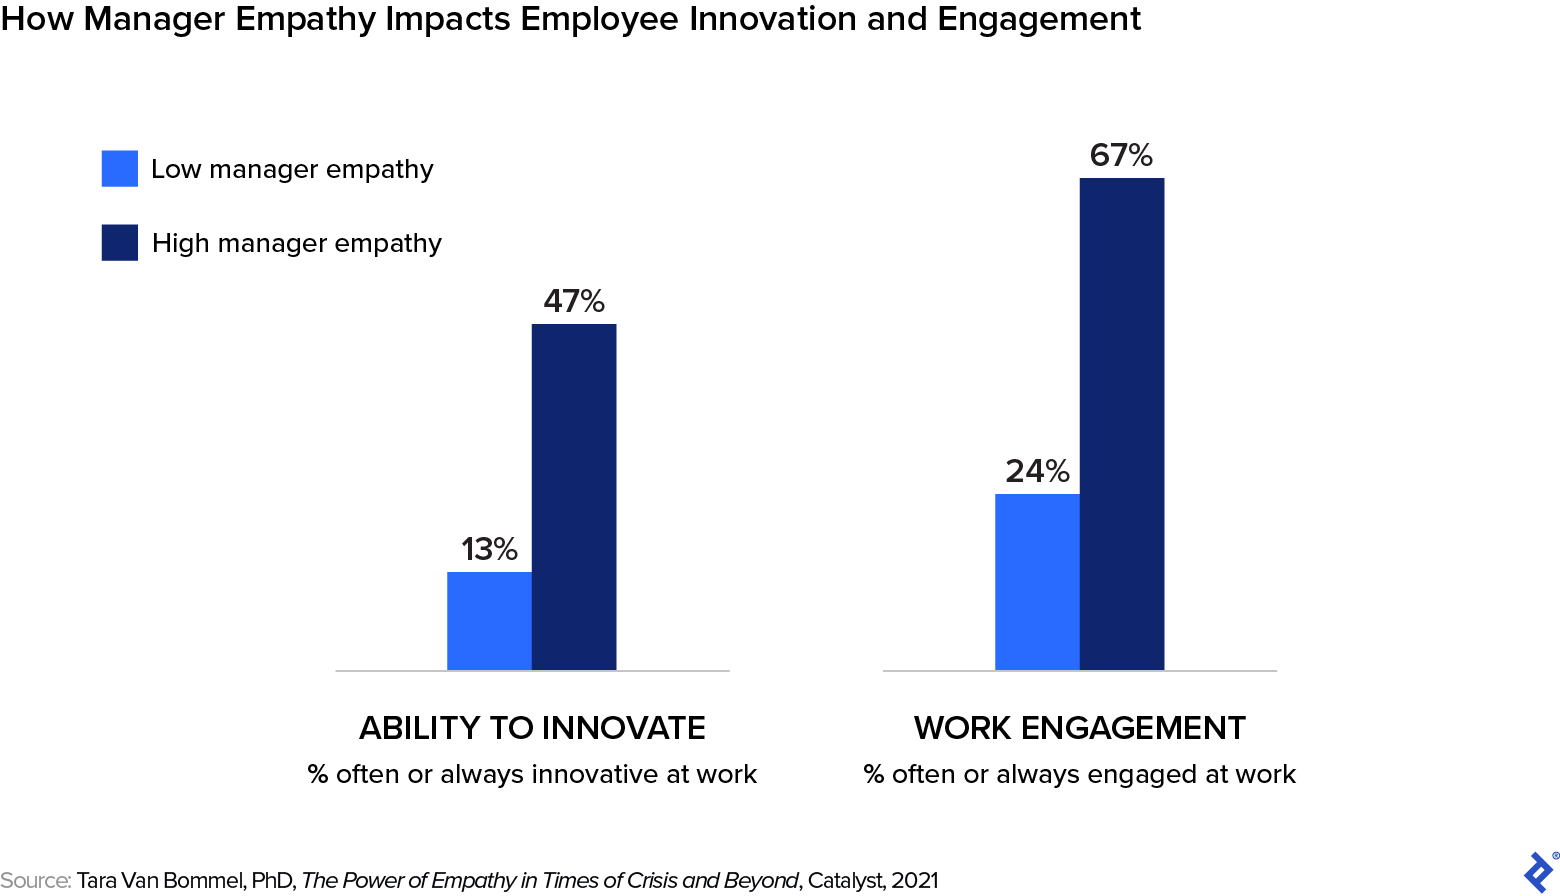 Manager empathy increases employees’ ability to innovate and their work engagement.